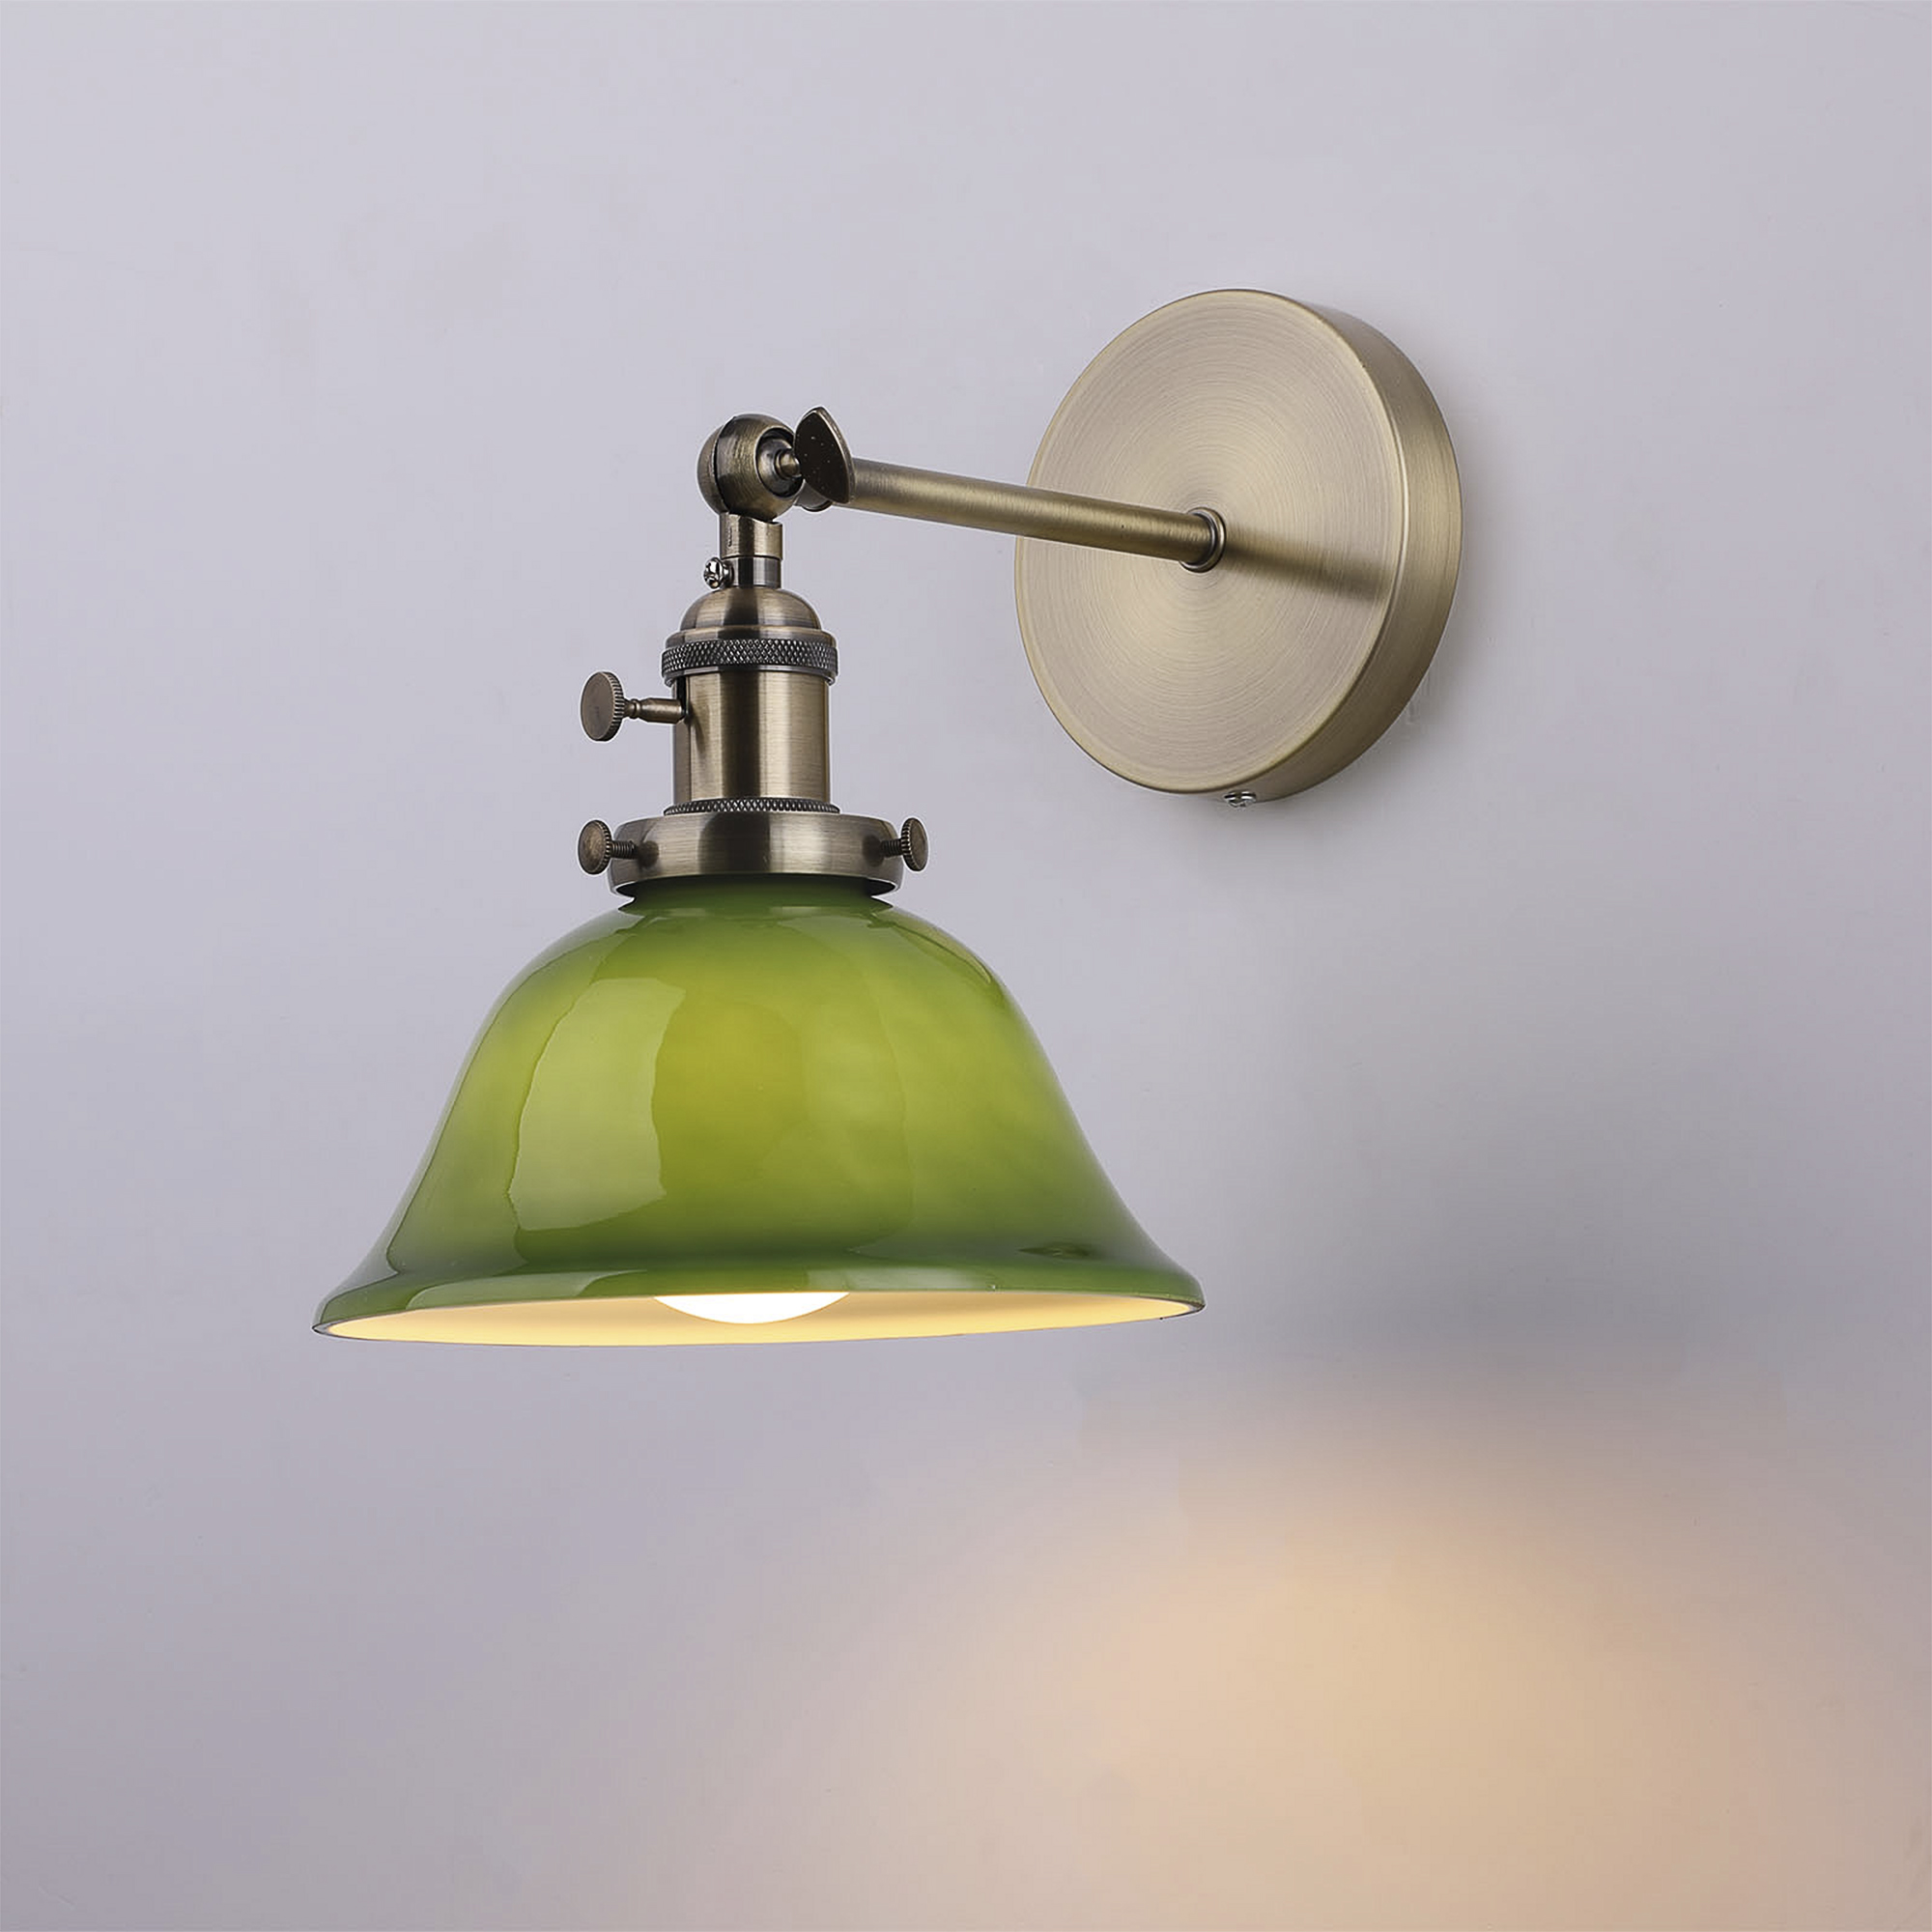 Vintage Industrial Wall Light With, Antique Green Glass Lamp Shade